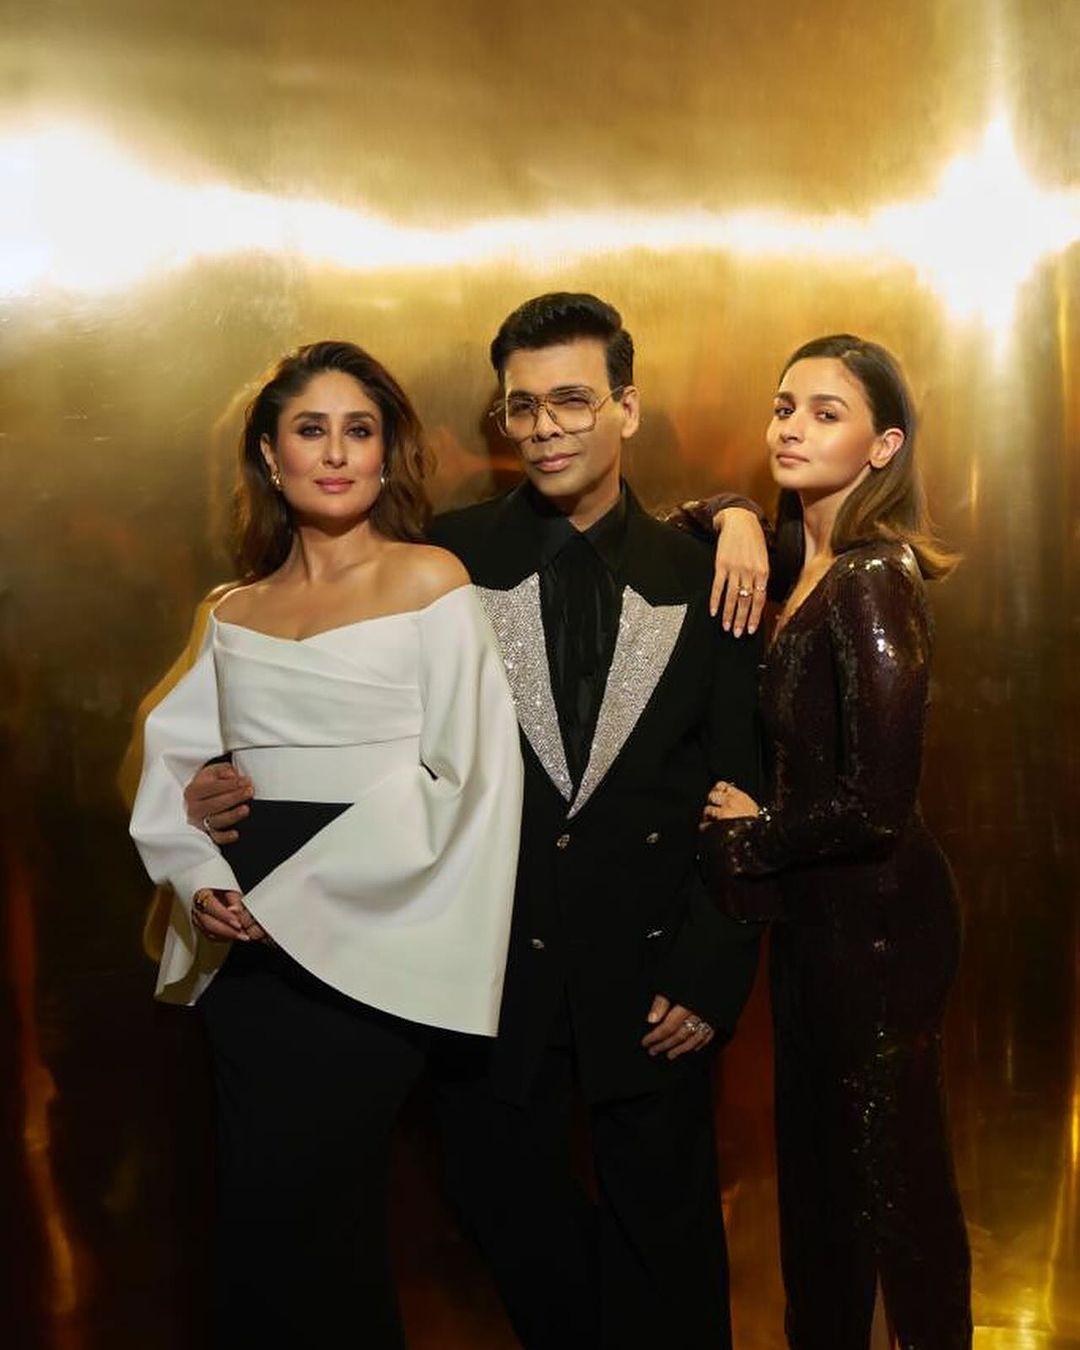 The anticipation around the 4th episode of Koffee With Karan 8 is high. Amid the curiosity, the makers of the Karan Johar-hosted chat show released a new promo featuring Kareena Kapoor Khan and Alia Bhatt